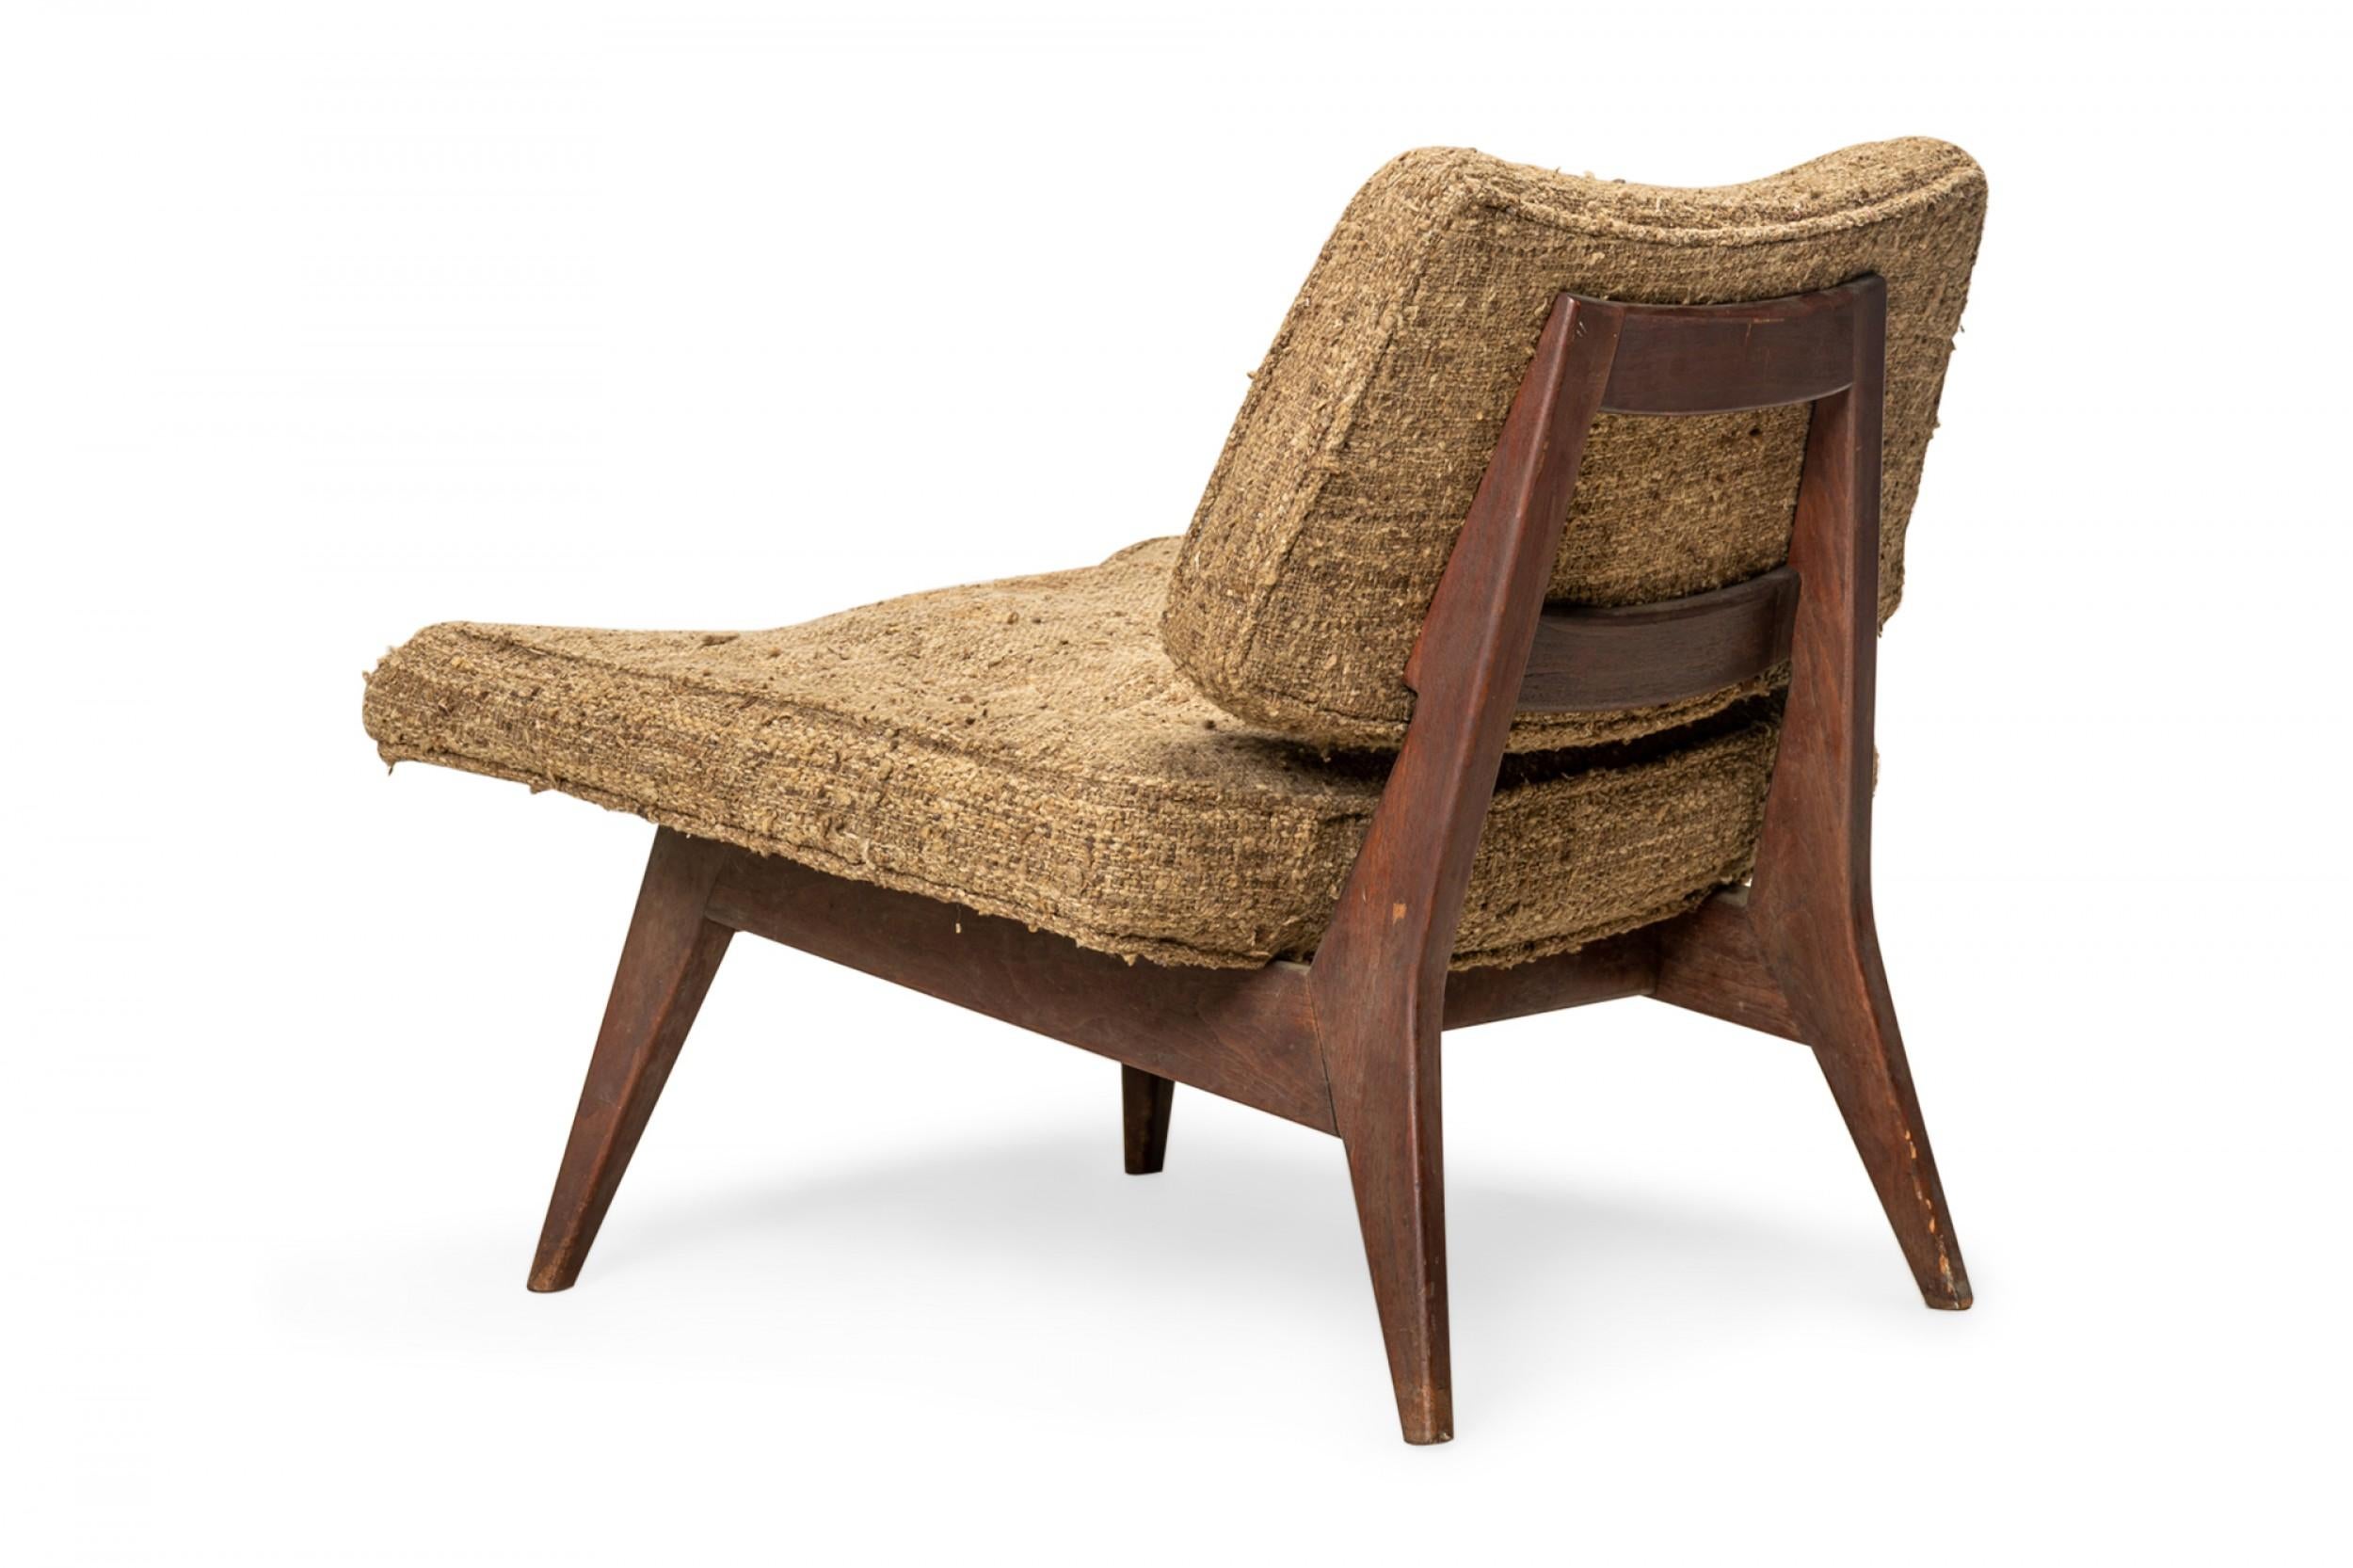 Mid-Century Modern Jens Risom Beige Textured Upholstery and Teak Wide Seat Slipper Chair